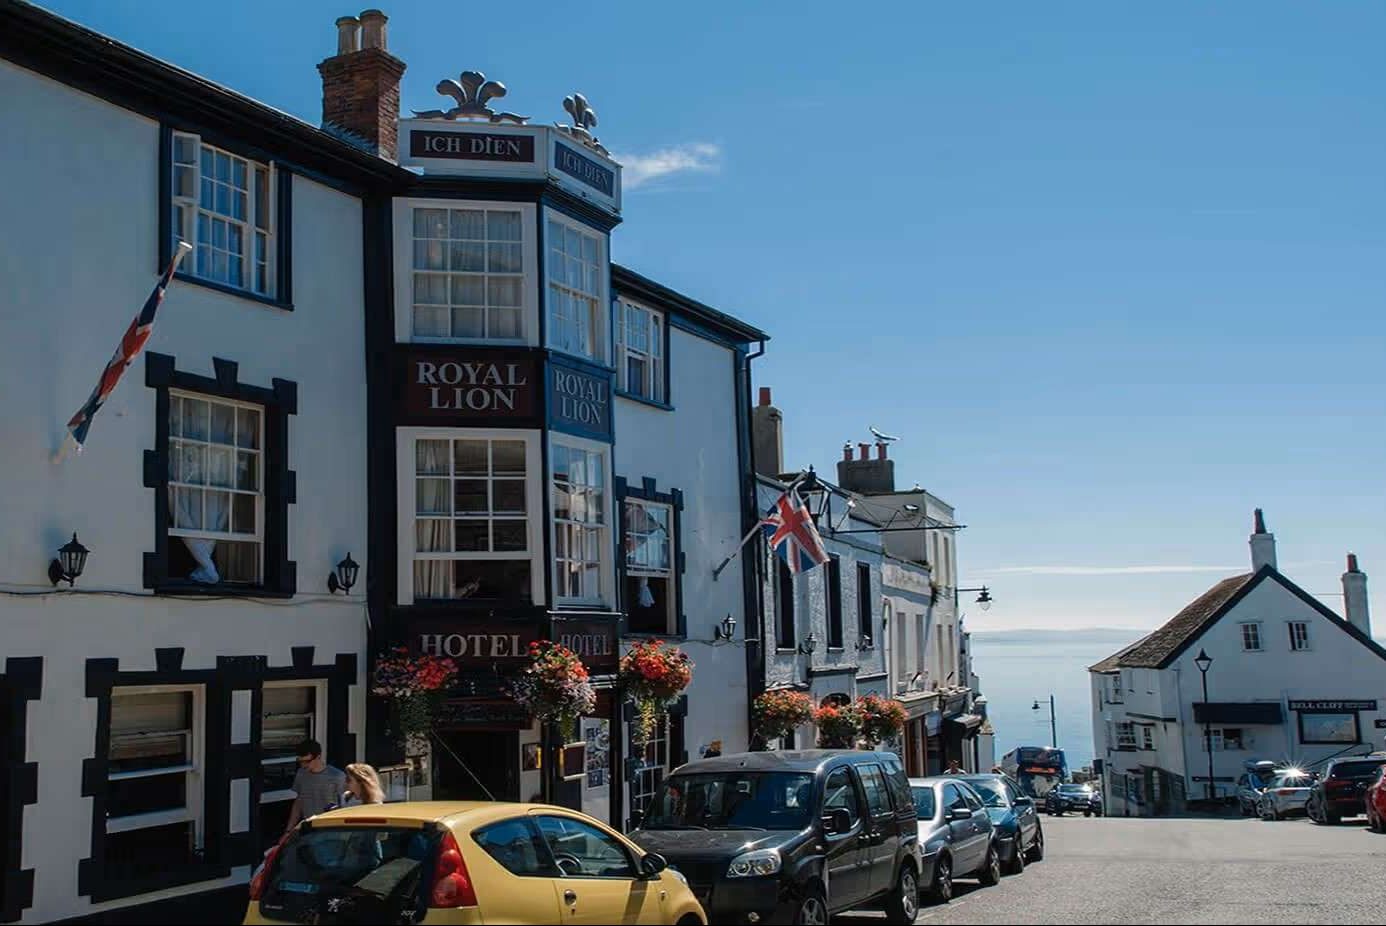 The Royal Lion Hotel -Summer Pubs